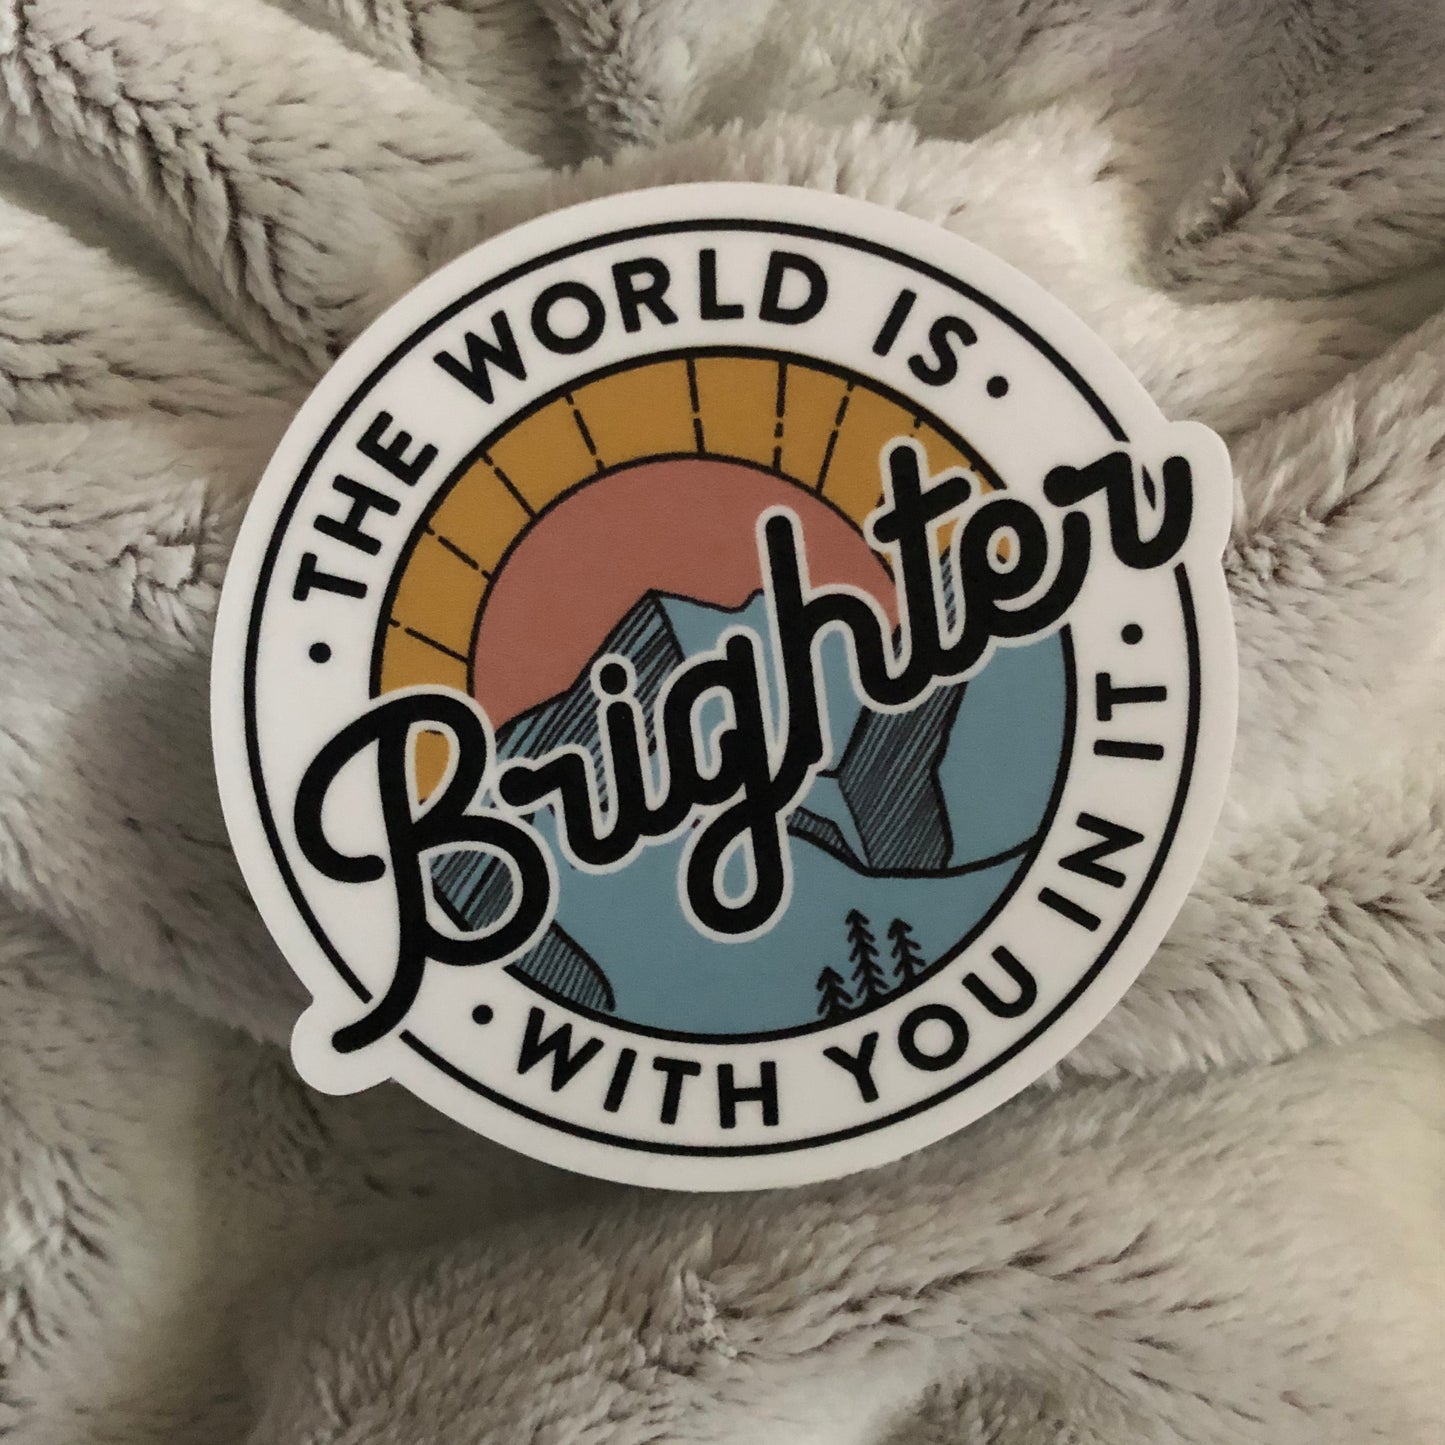 “The World Is Brighter With You In It” Waterproof Vinyl Sticker